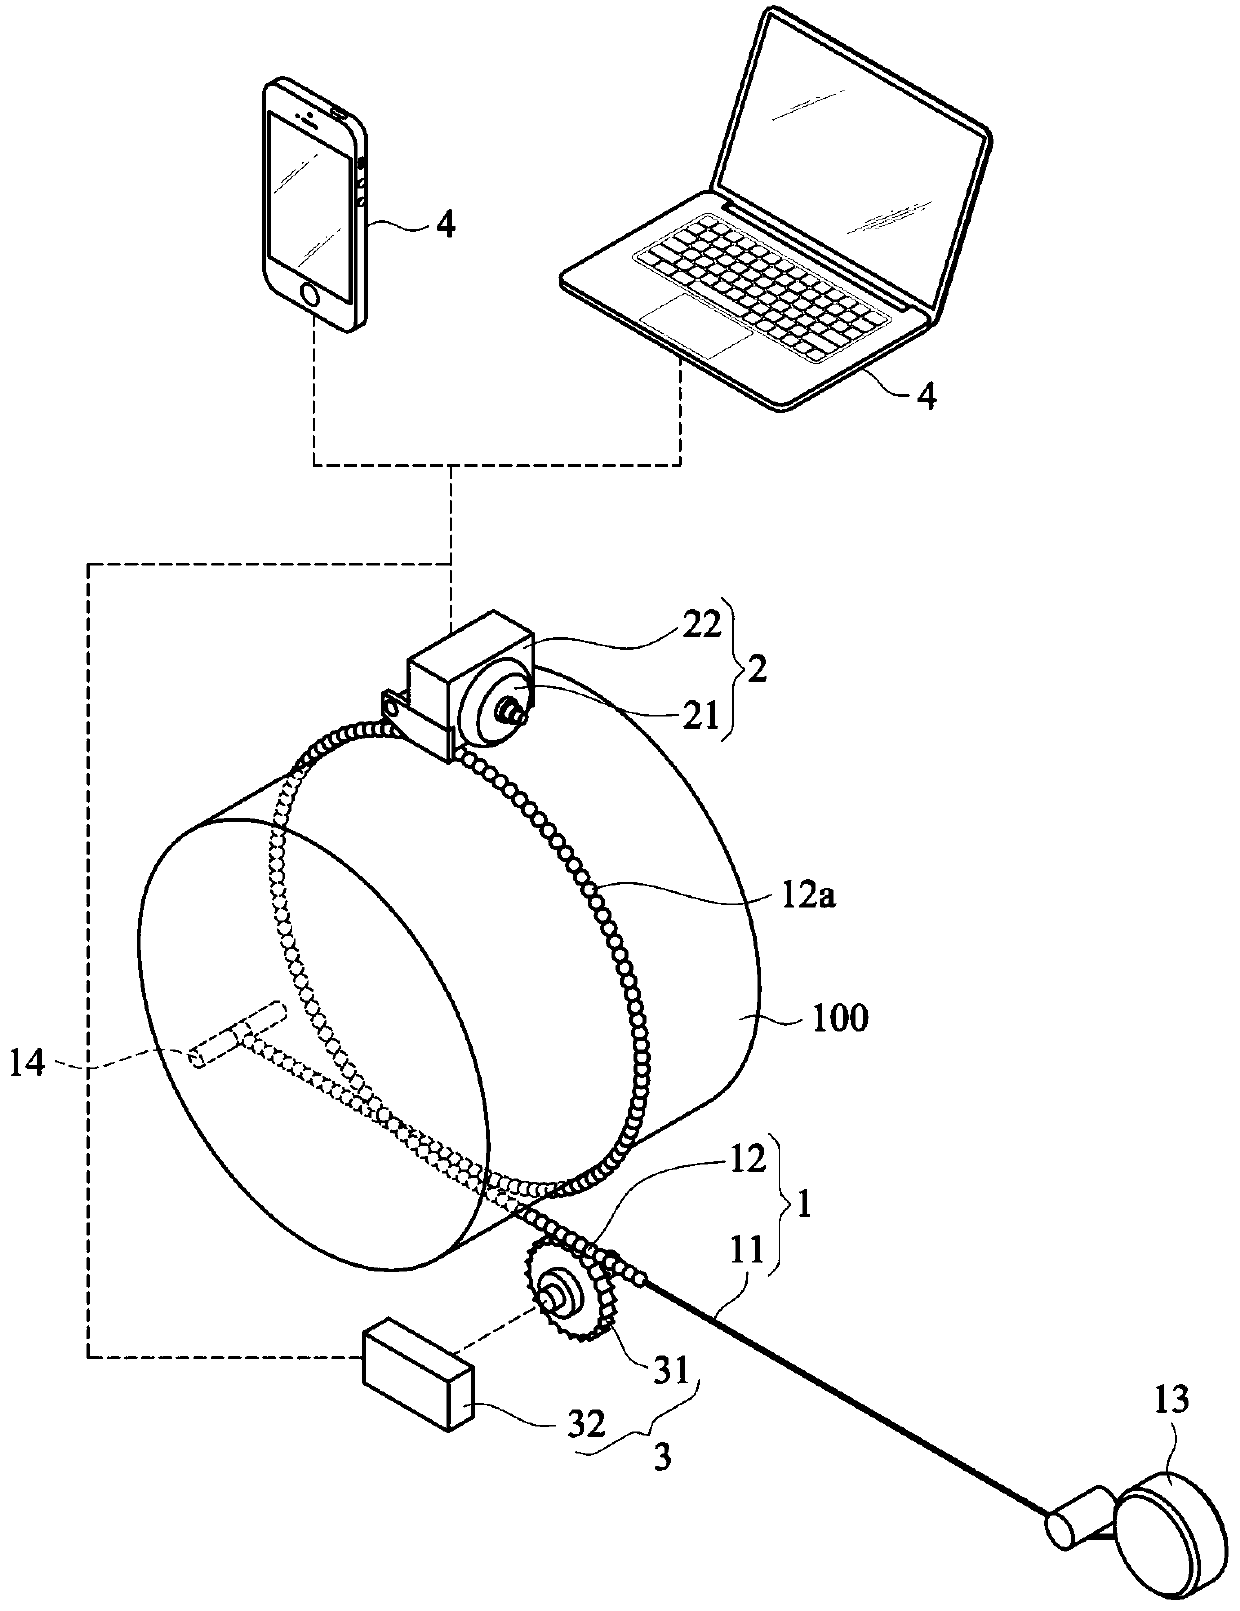 An apparatus for measurement of a limb circumference, a device for measurement of a limb compliance comprising the same and a device used in the treatment of lymphedema comprising the same